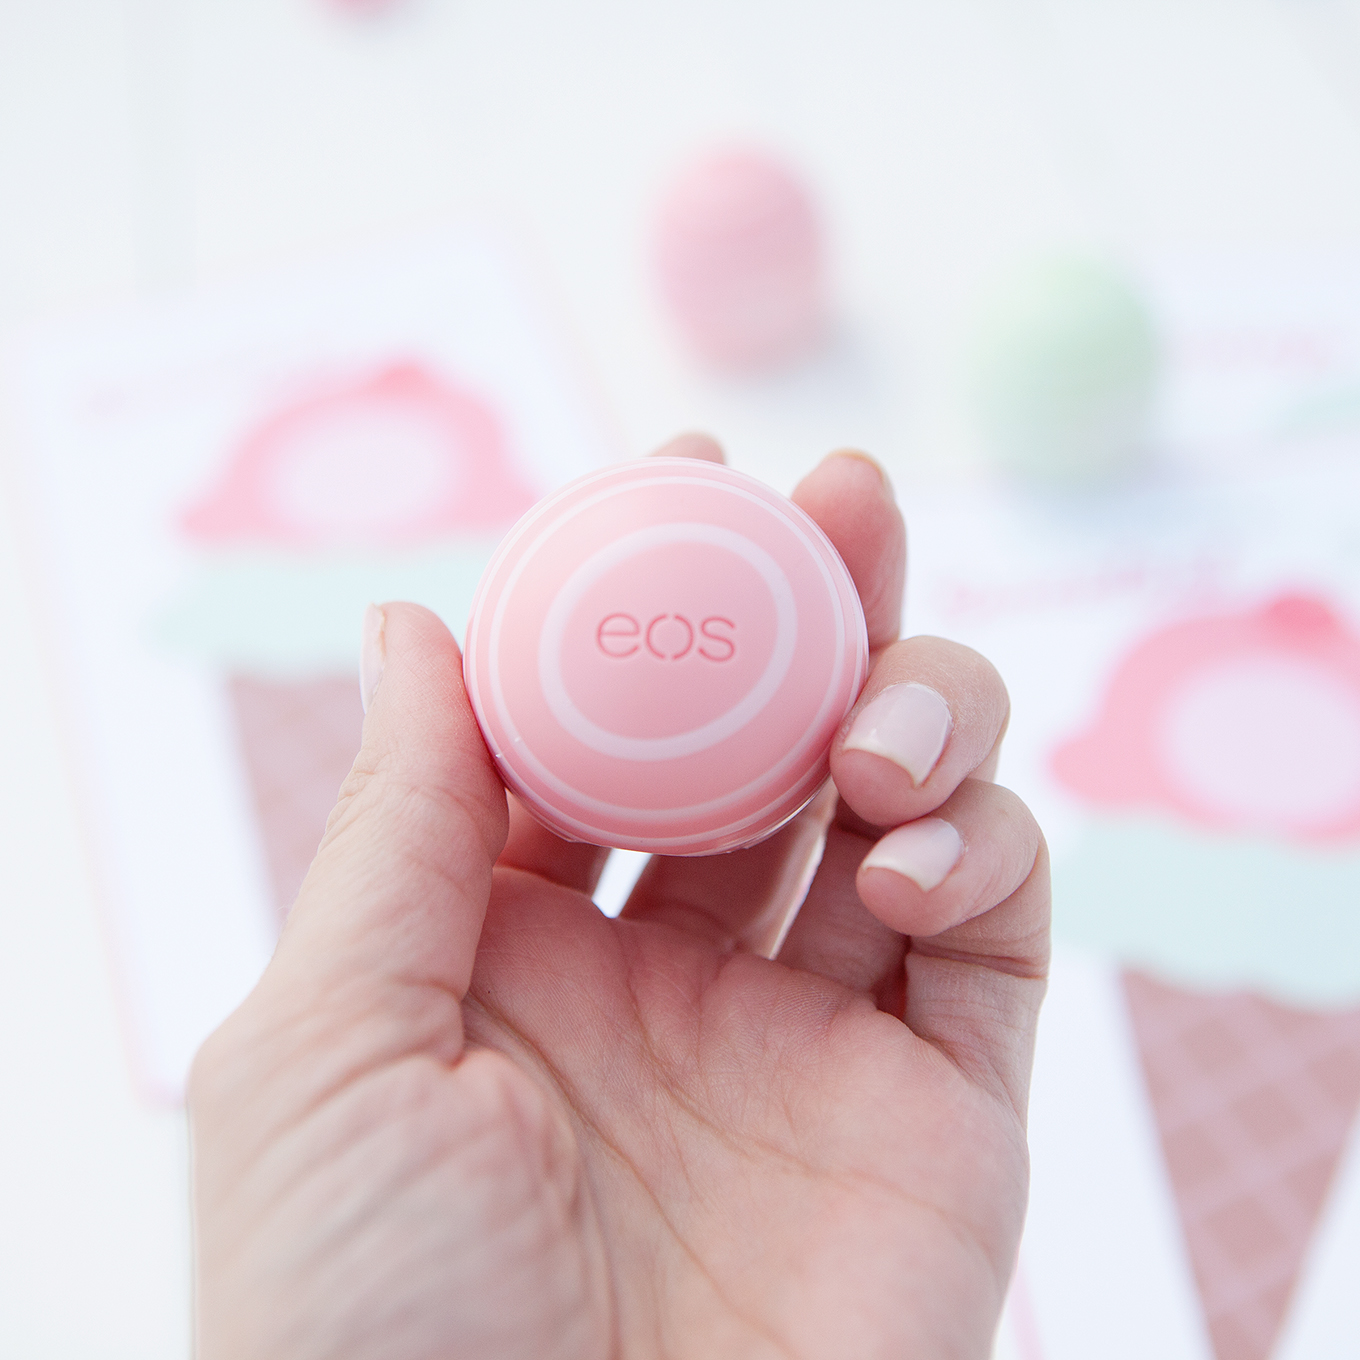 Mother's Day will be here before you know it – celebrate the special mom in your life with a simple card and her favorite EOS lip balm!